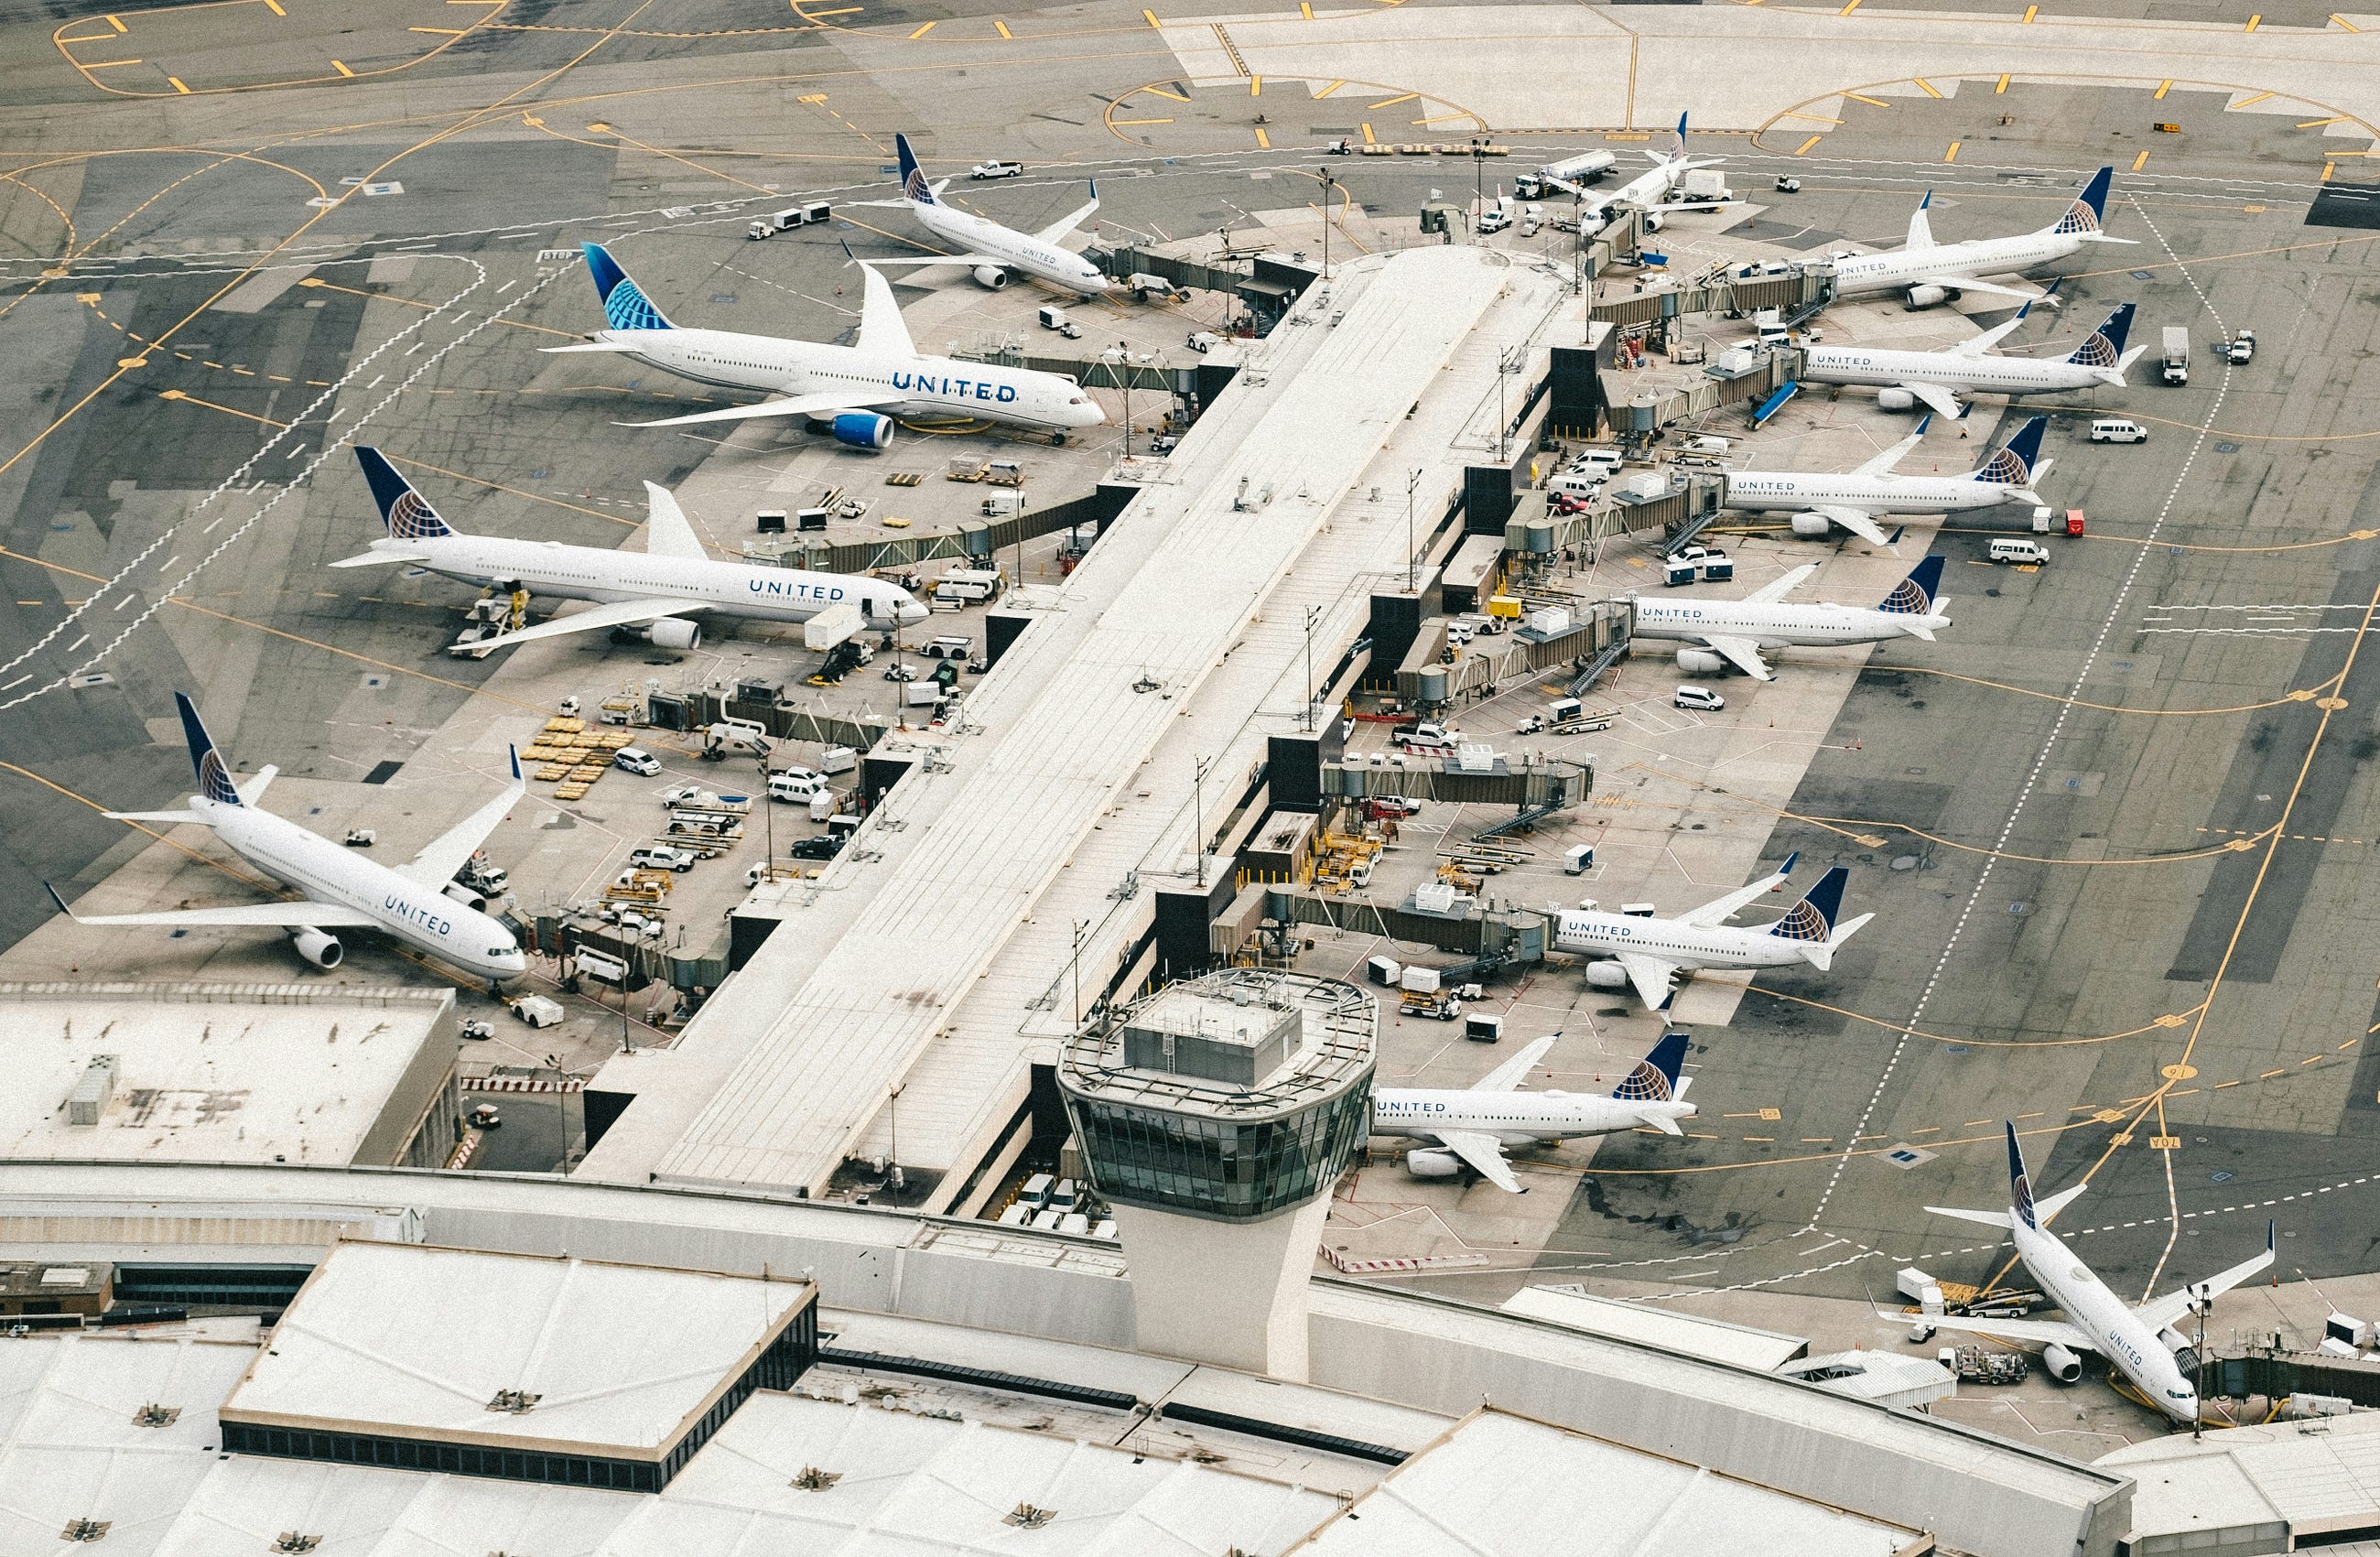 The Aviation Industry’s Multifaceted Crisis